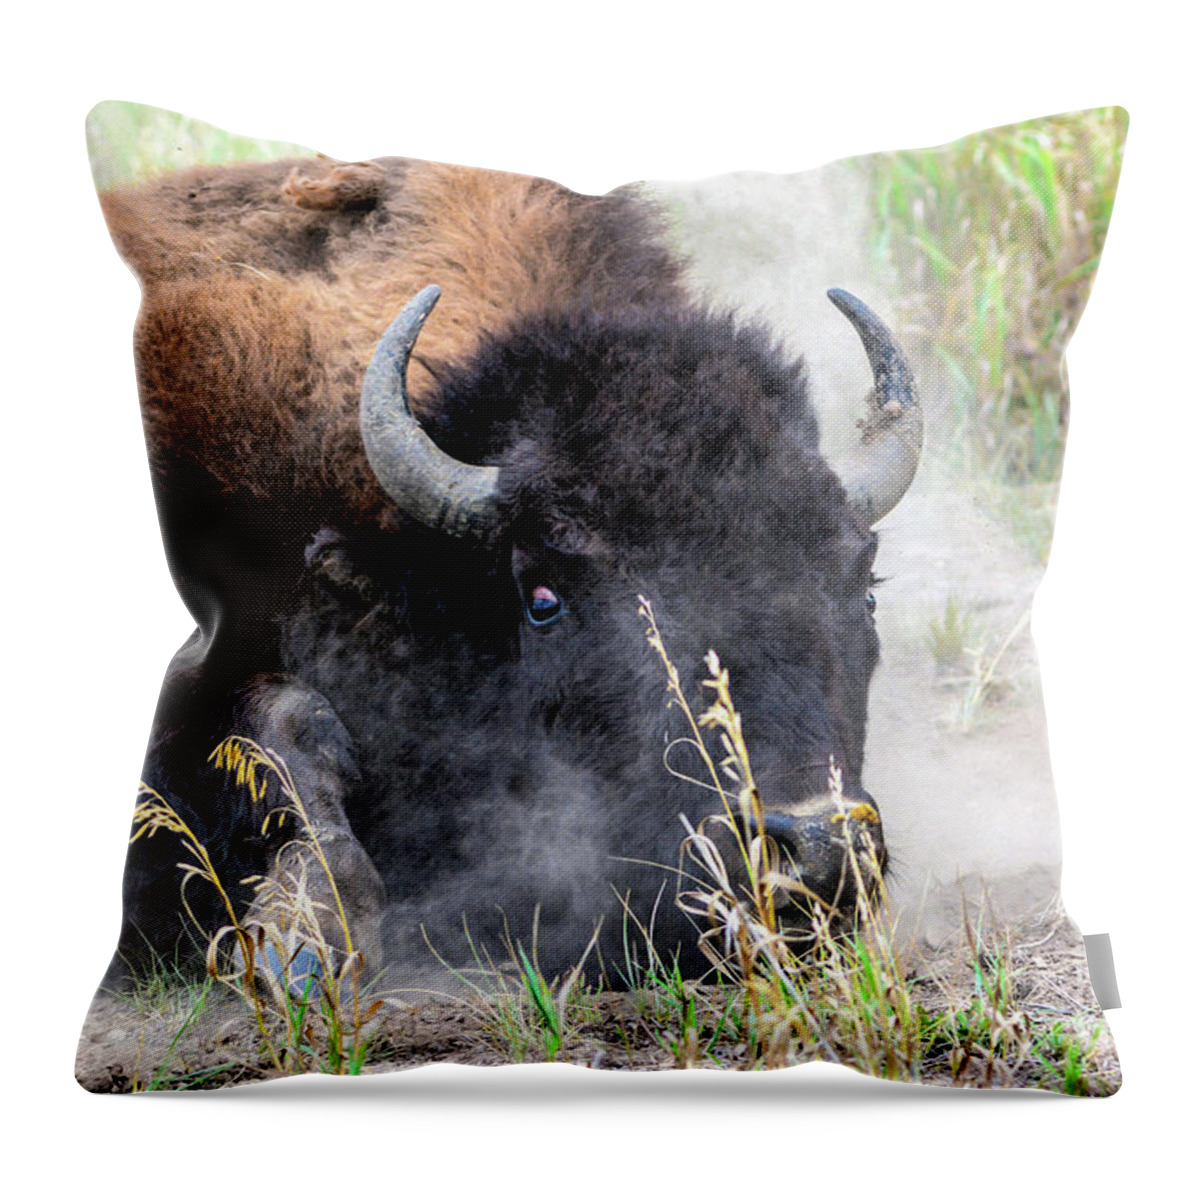 Bison Throw Pillow featuring the photograph Rollin' in the Dirt by John Greco